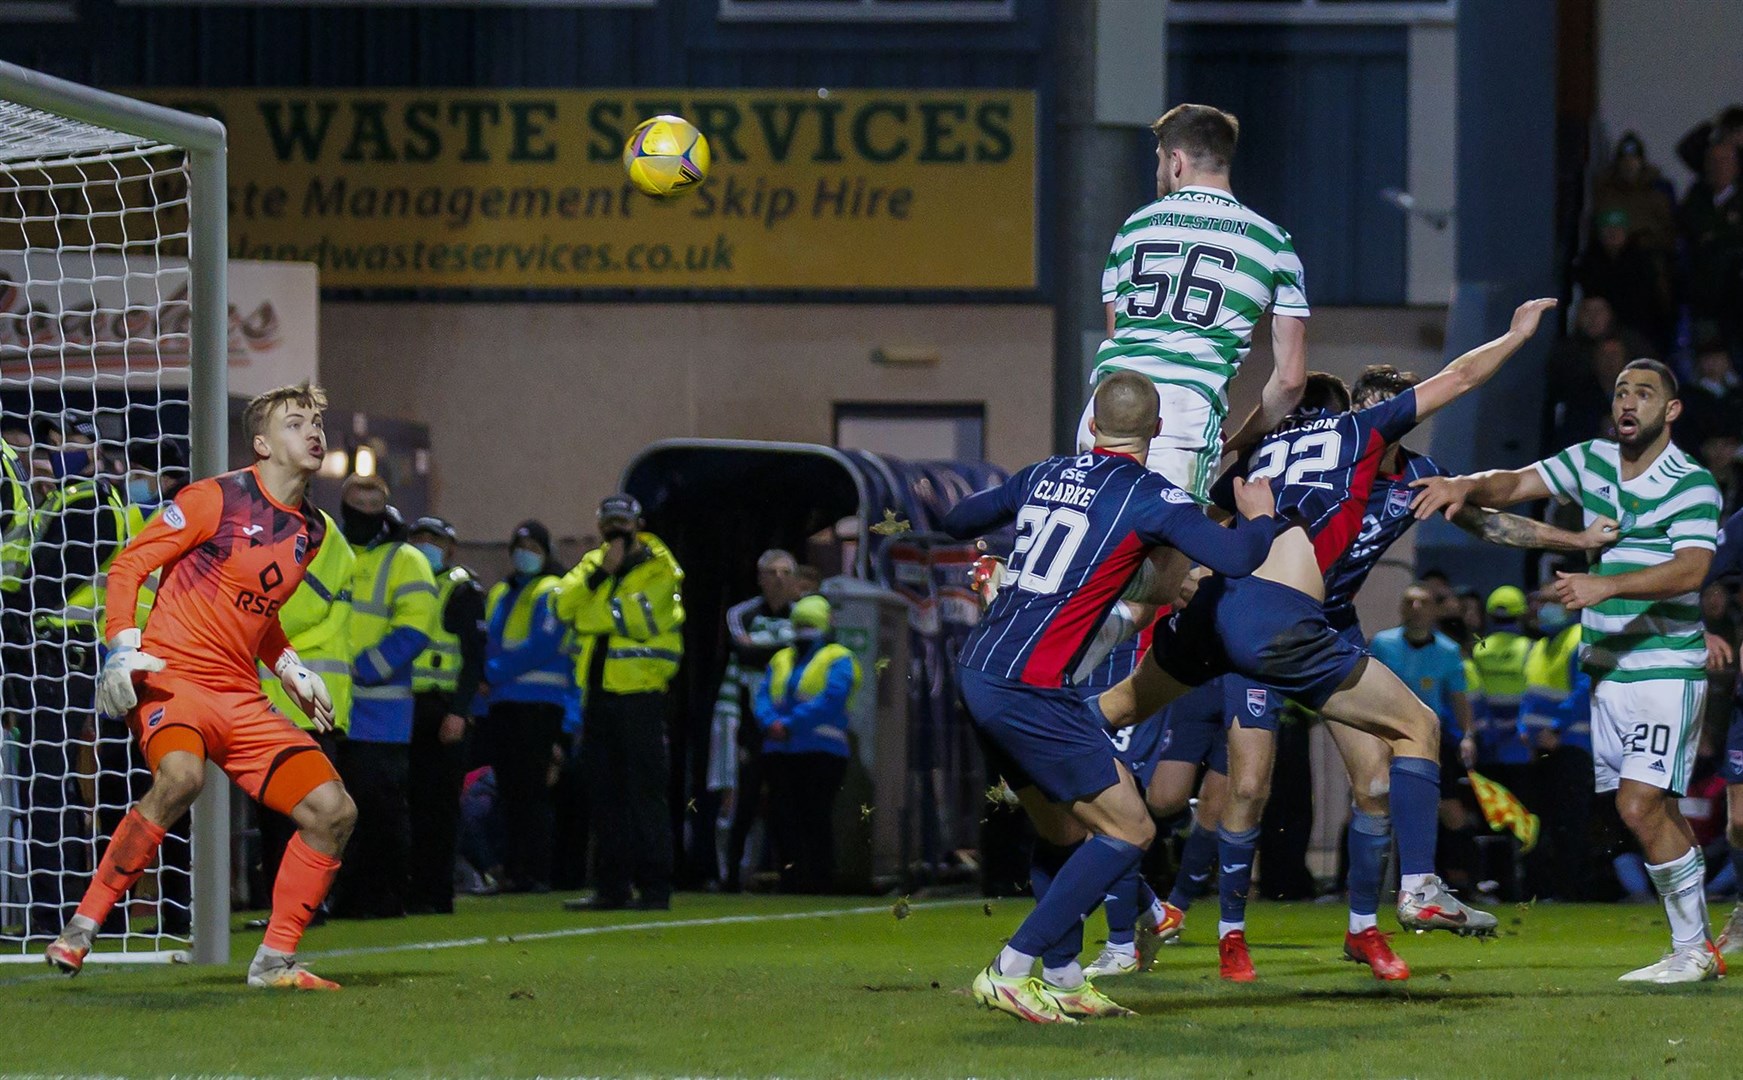 Picture - Ken Macpherson, Inverness. Ross County(1) Celtic(2). 15.12.21. Celtic’s Anthony Ralston heads the late winning goal past Ross County 'keeper Ashley Maynard-Brewer.